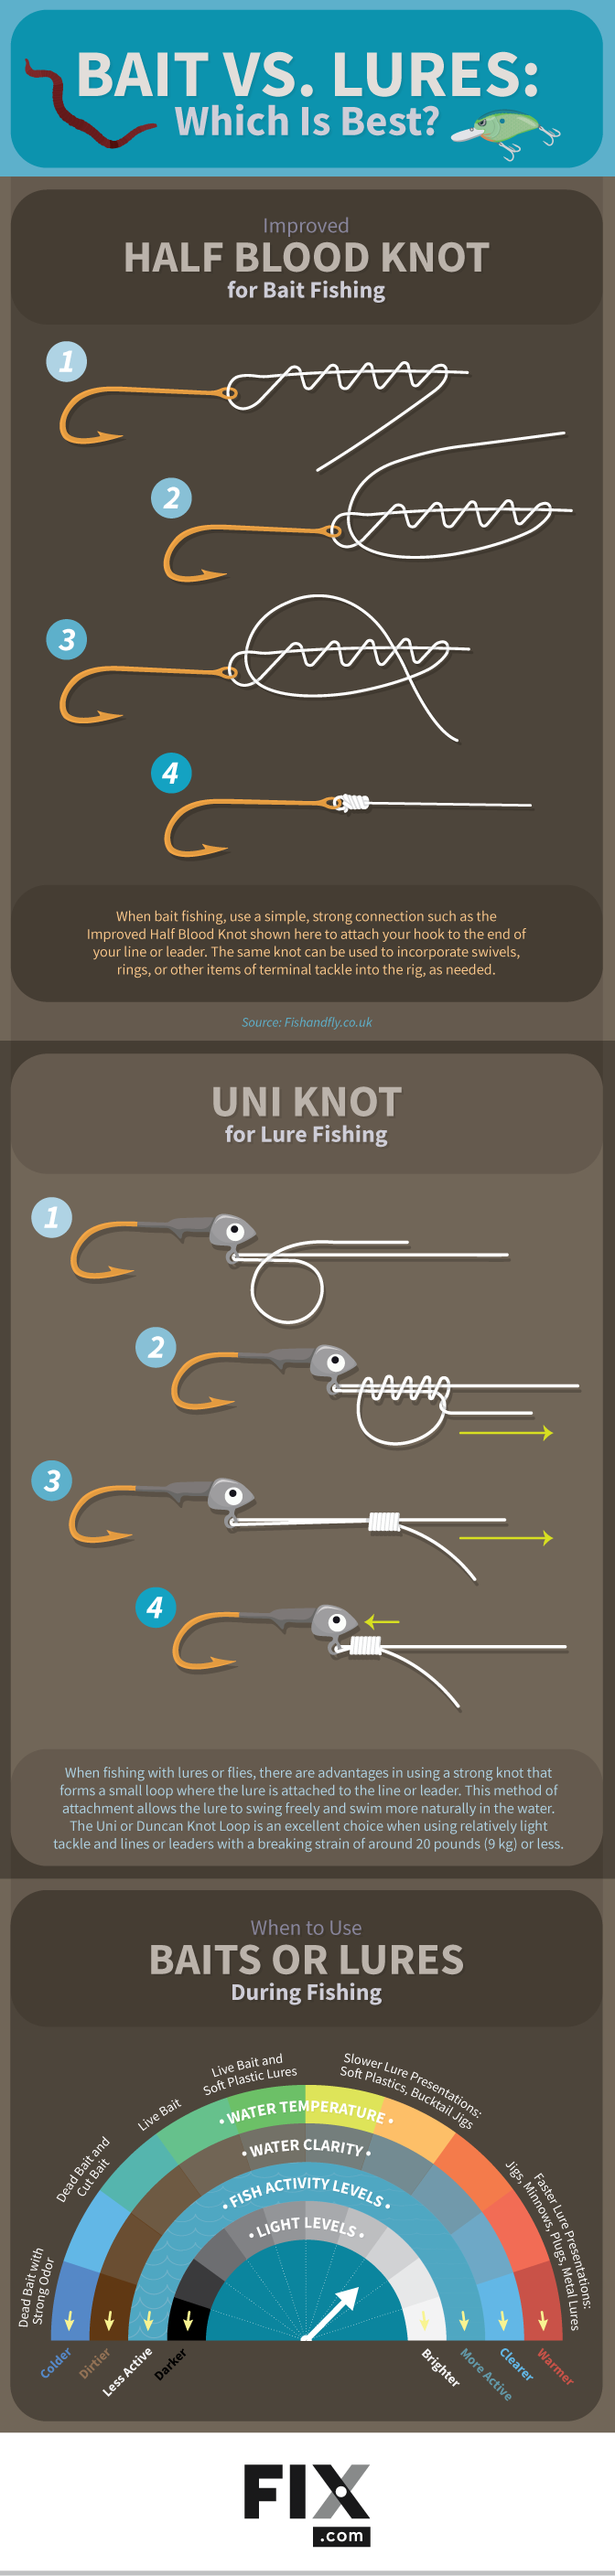 Fishing Knots for Bait and Lures